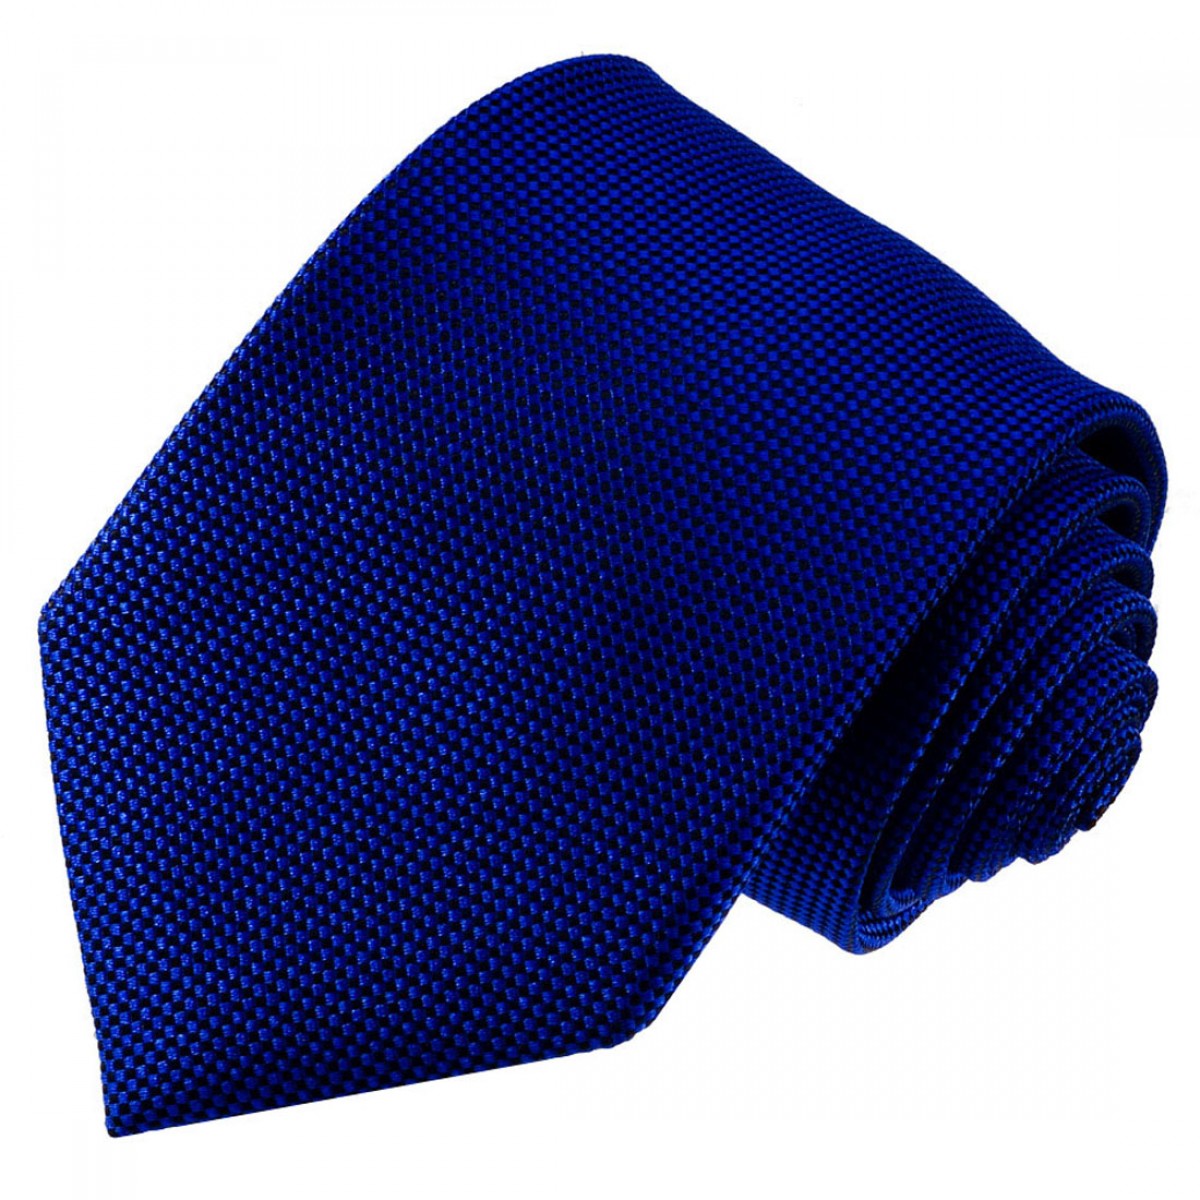 LORENZO CANA - The Official Online Store - Neck Tie 100% Silk Checkered ...